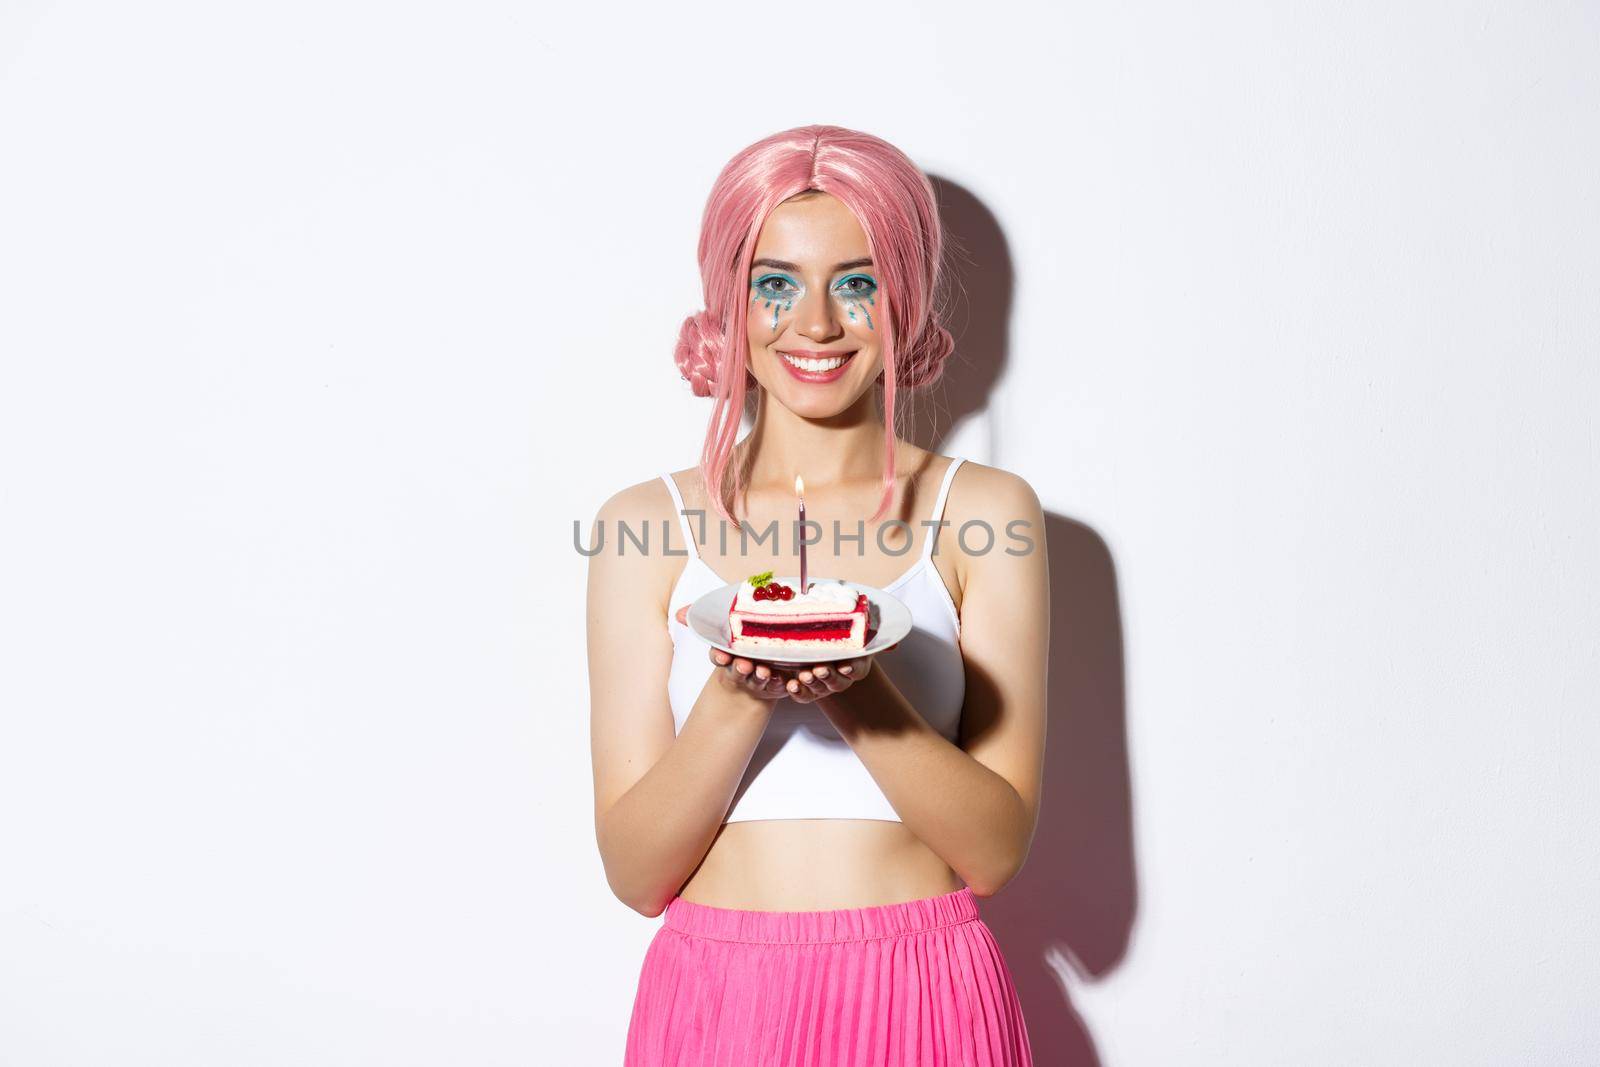 Image of beautiful birthday girl in pink wig, holding b-day cake with lit candle, smiling and making wish, celebrating holiday over white background.